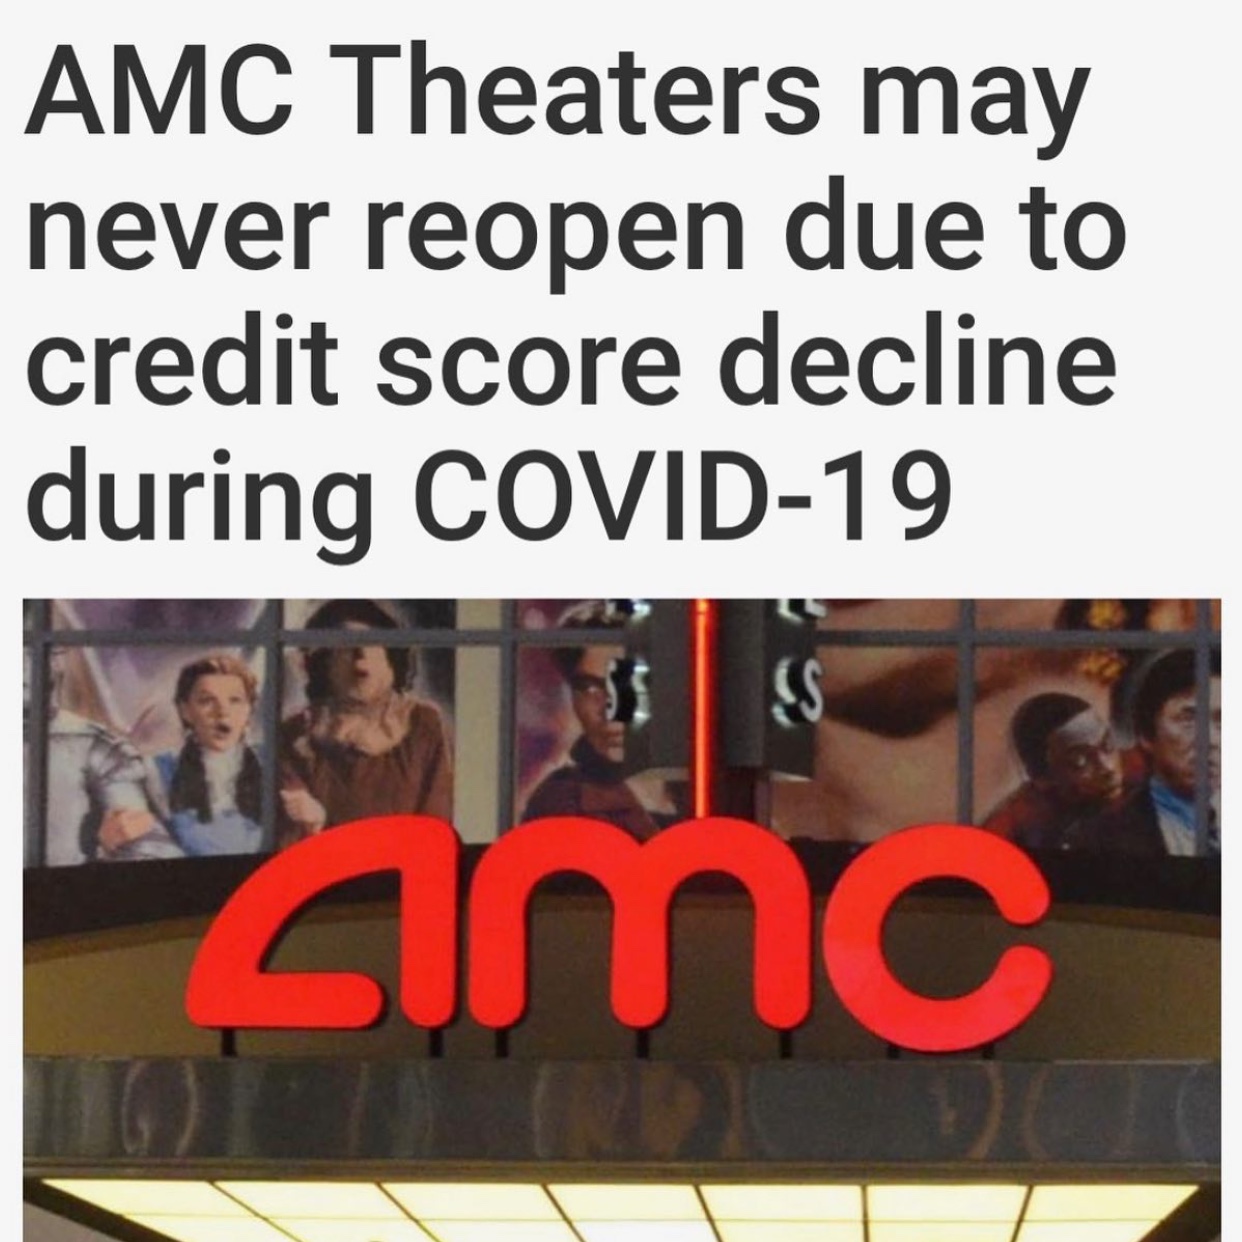 banner - Amc Theaters may never reopen due to credit score decline during Covid19 simc